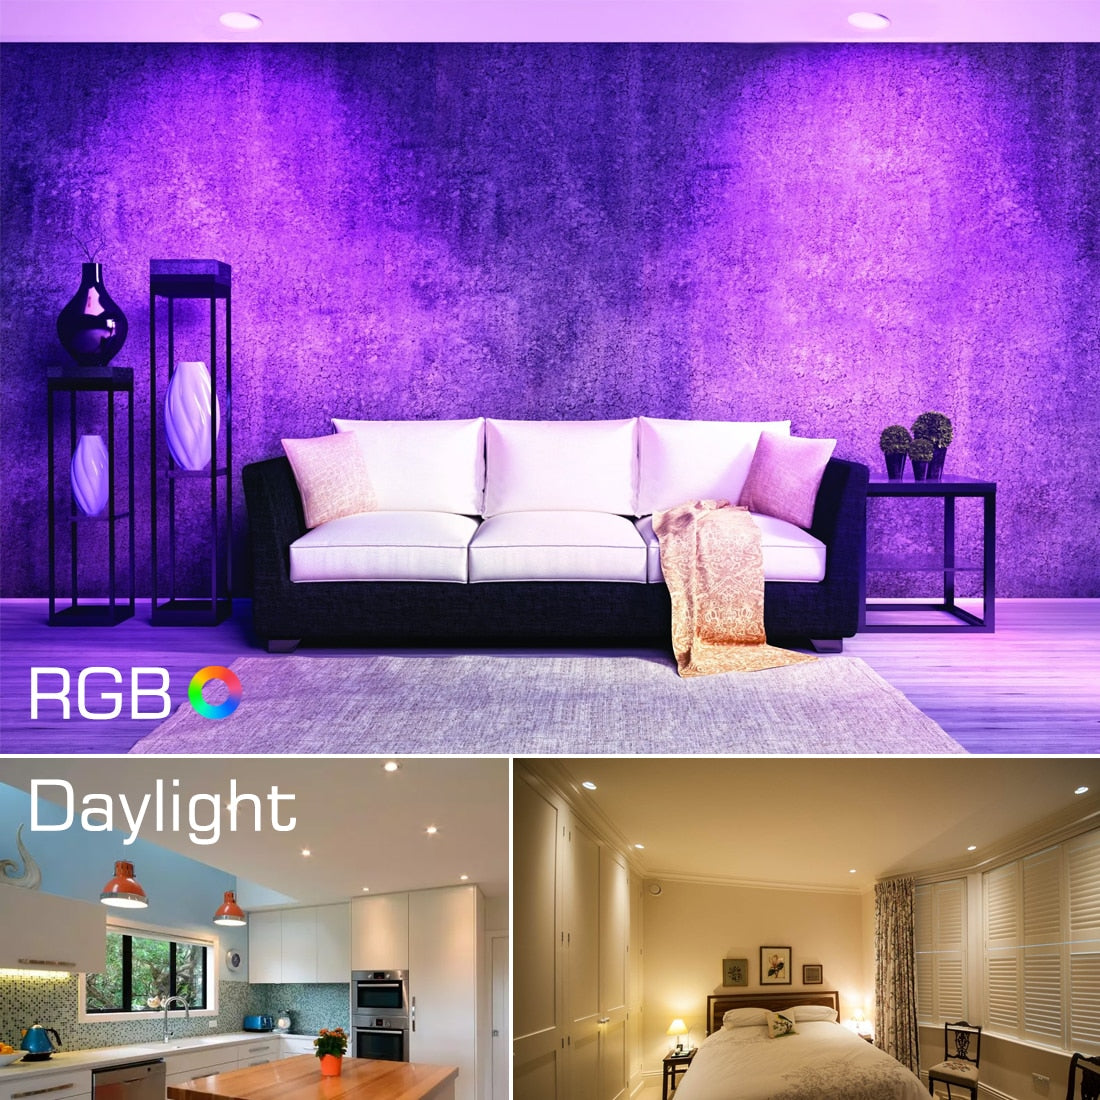 LED Ceiling Lamp RGB Downlight Dimmable Smart Home focos Bulb Light Spotlight Colour Changing Fan 220V 110V Work with Bluetooth